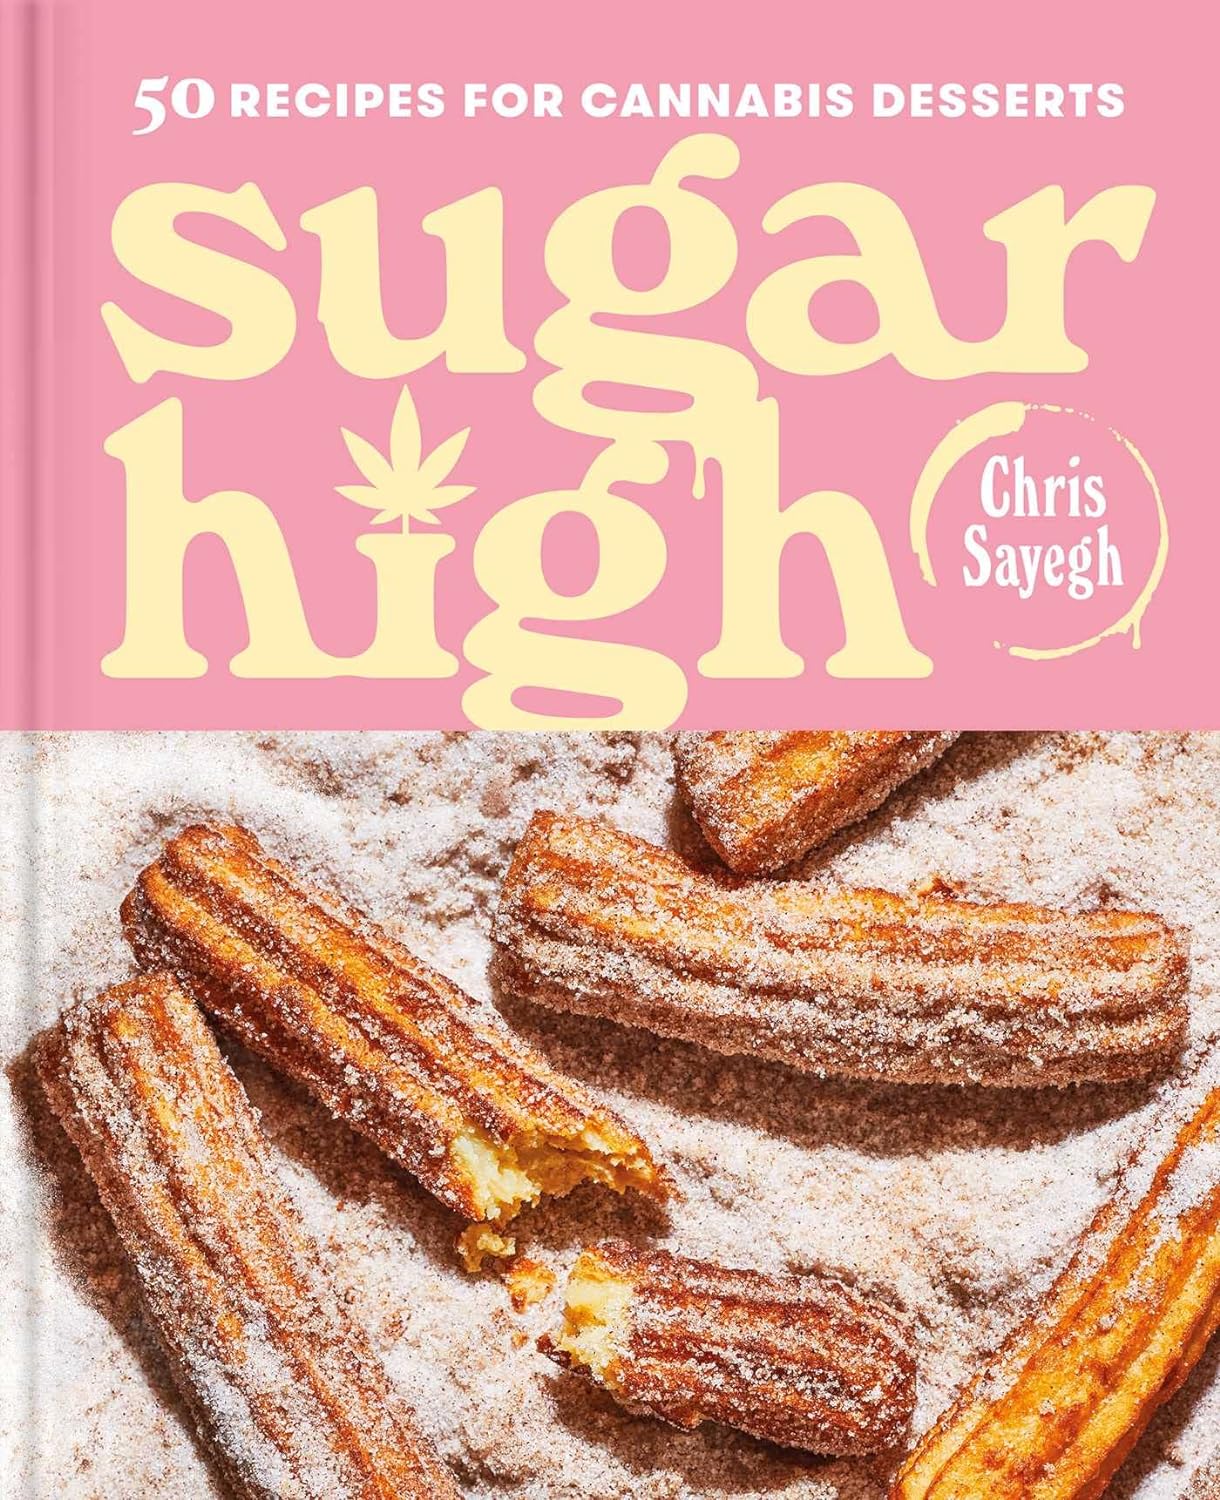 50 recipes for cannabis deserts